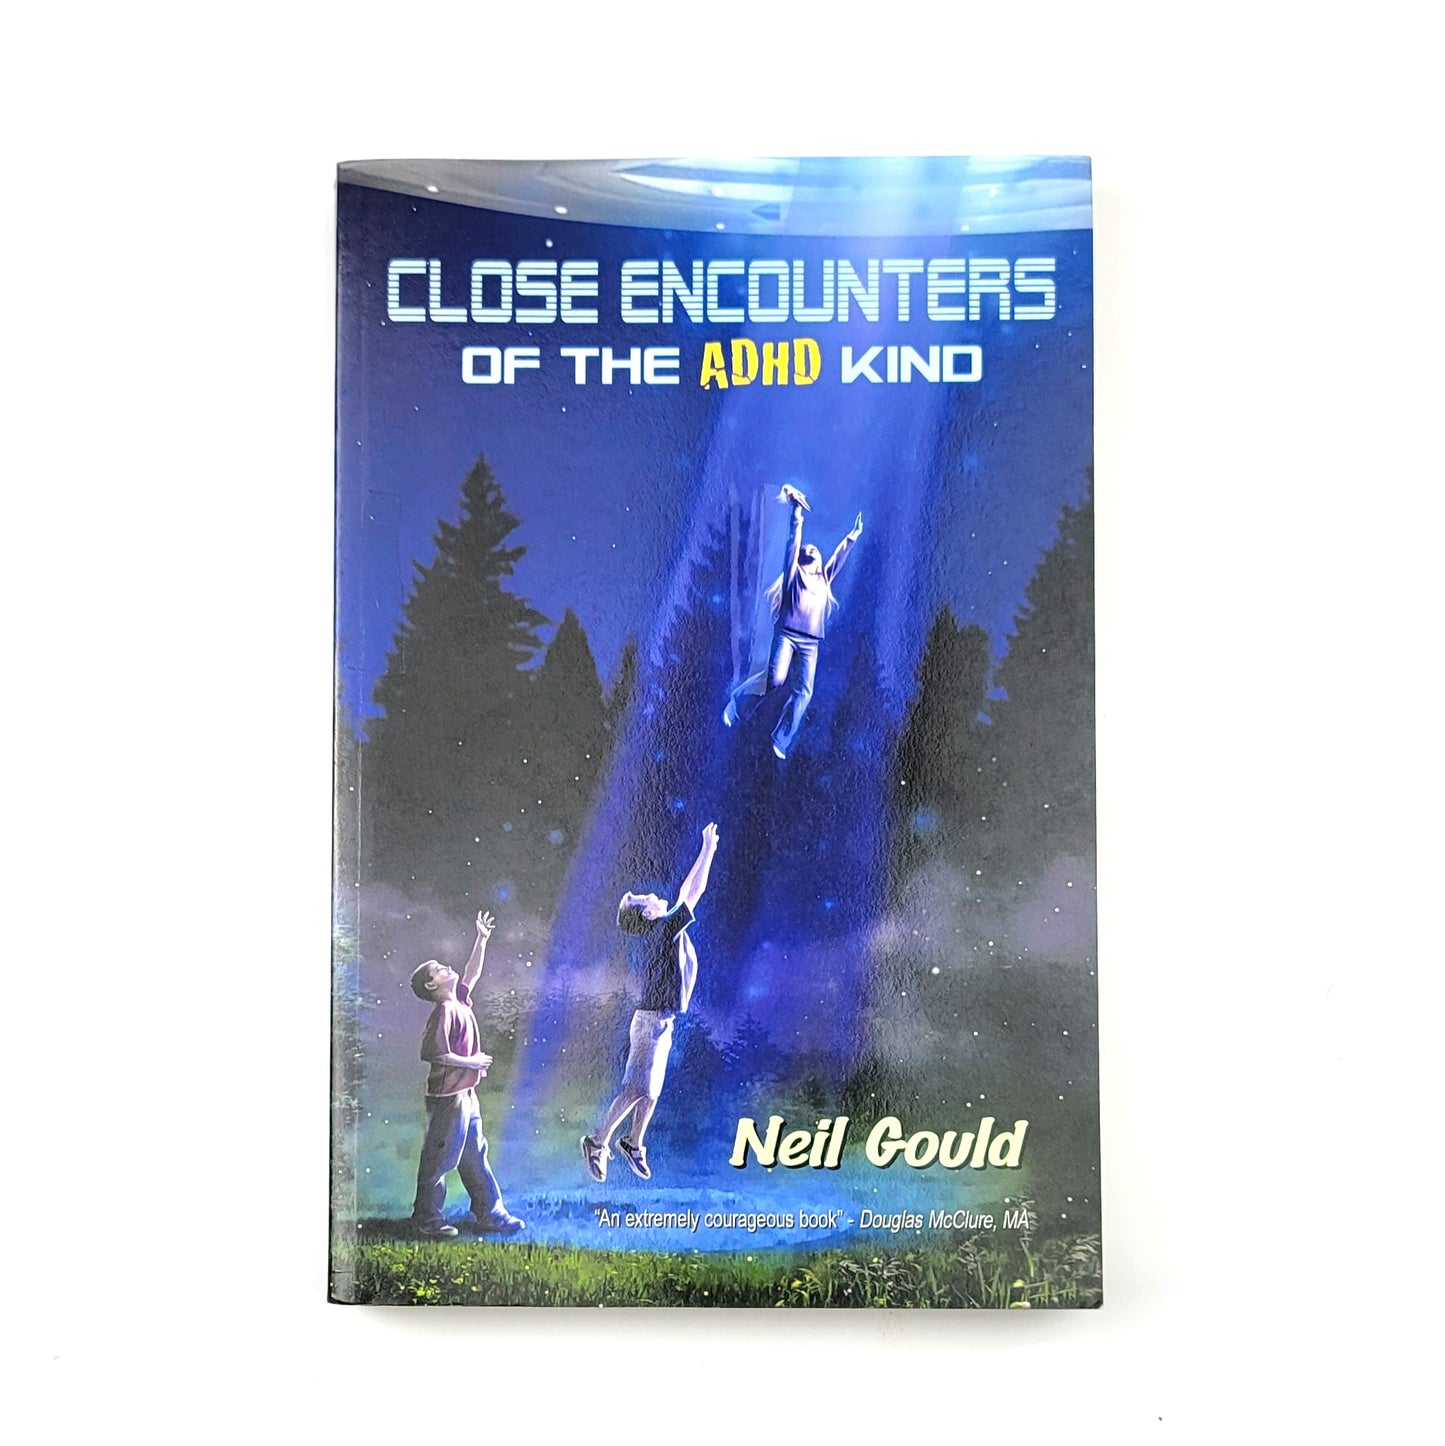 Close Encounters of the ADHD Kind by Neil Gould